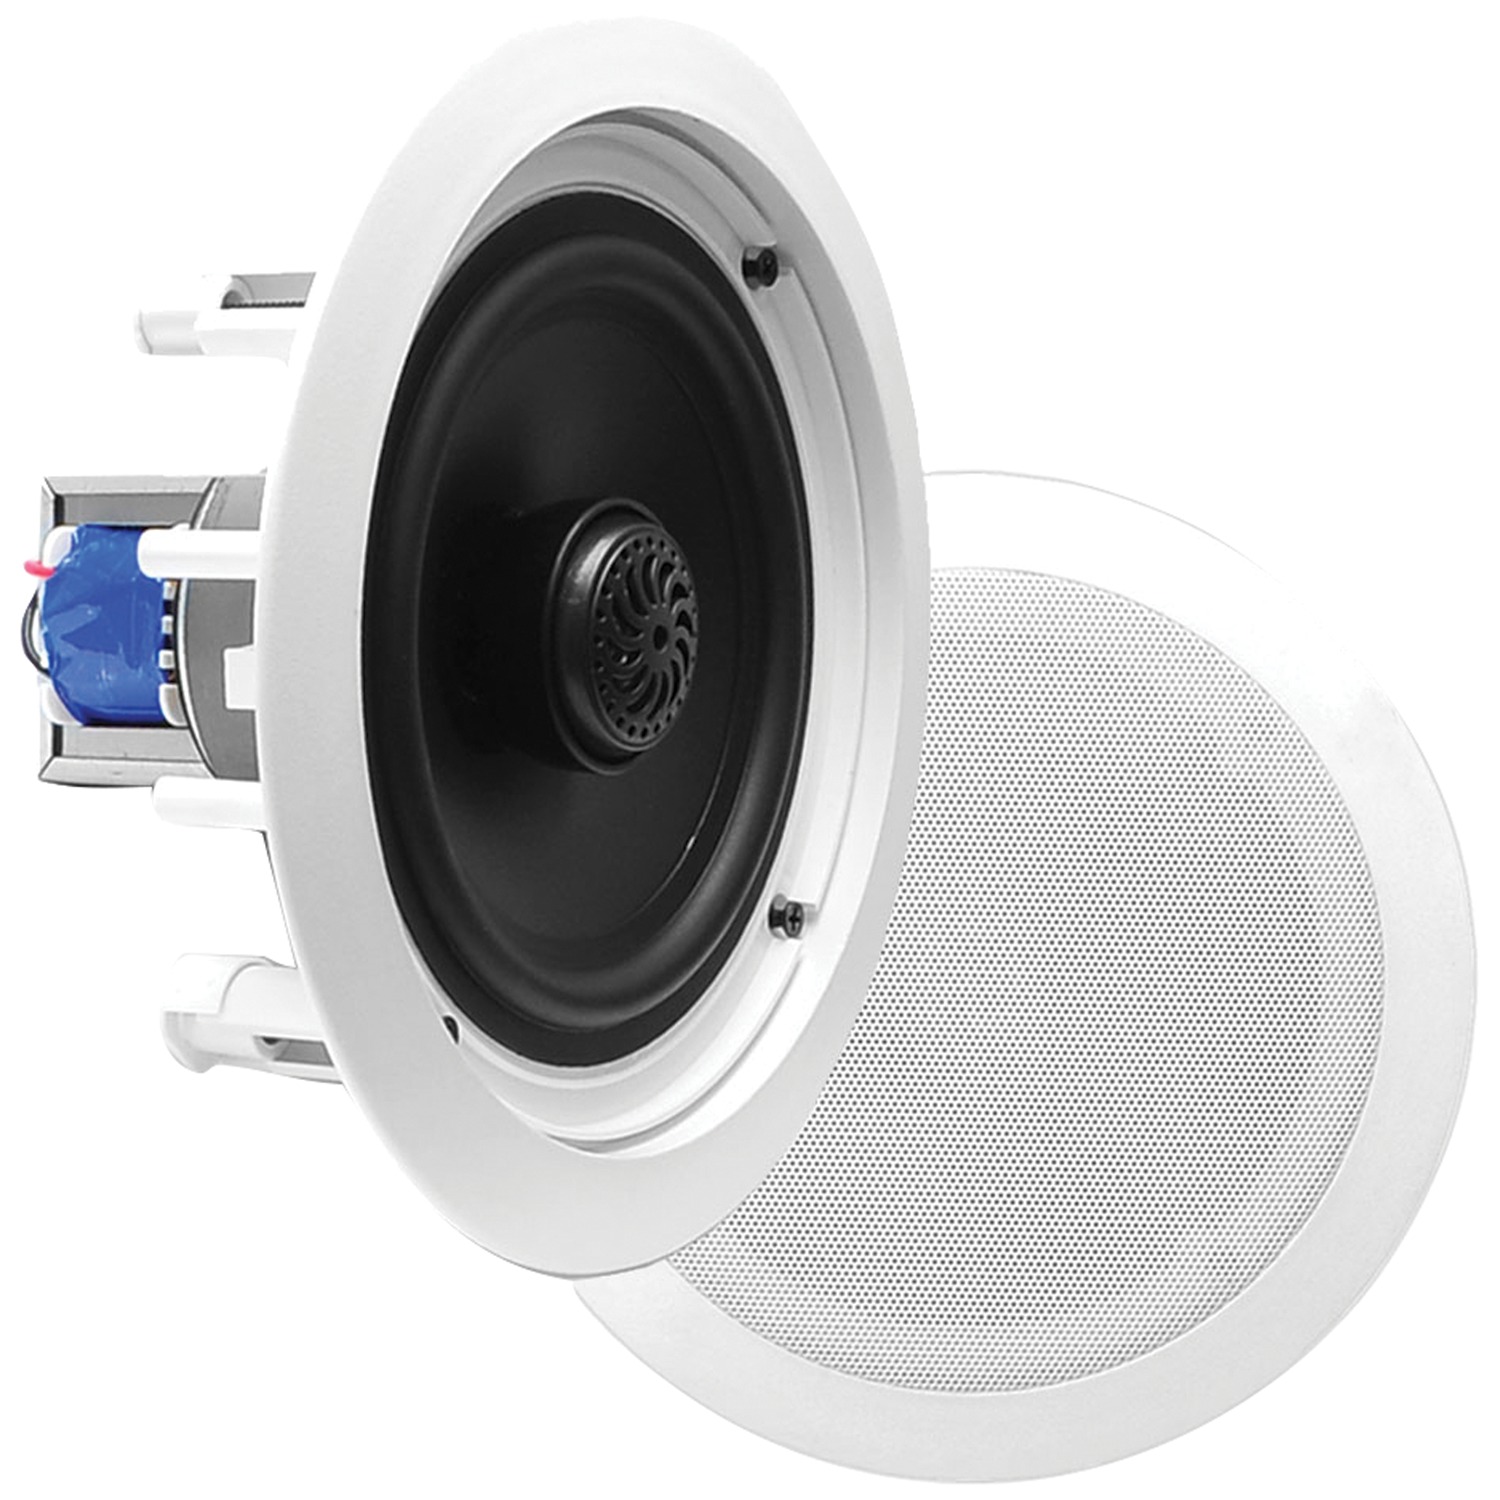 Pyle Home 6.5 Inch 250W 2 Way In Wall In Ceiling Stereo Speaker, Pair | PDIC60T - image 4 of 4